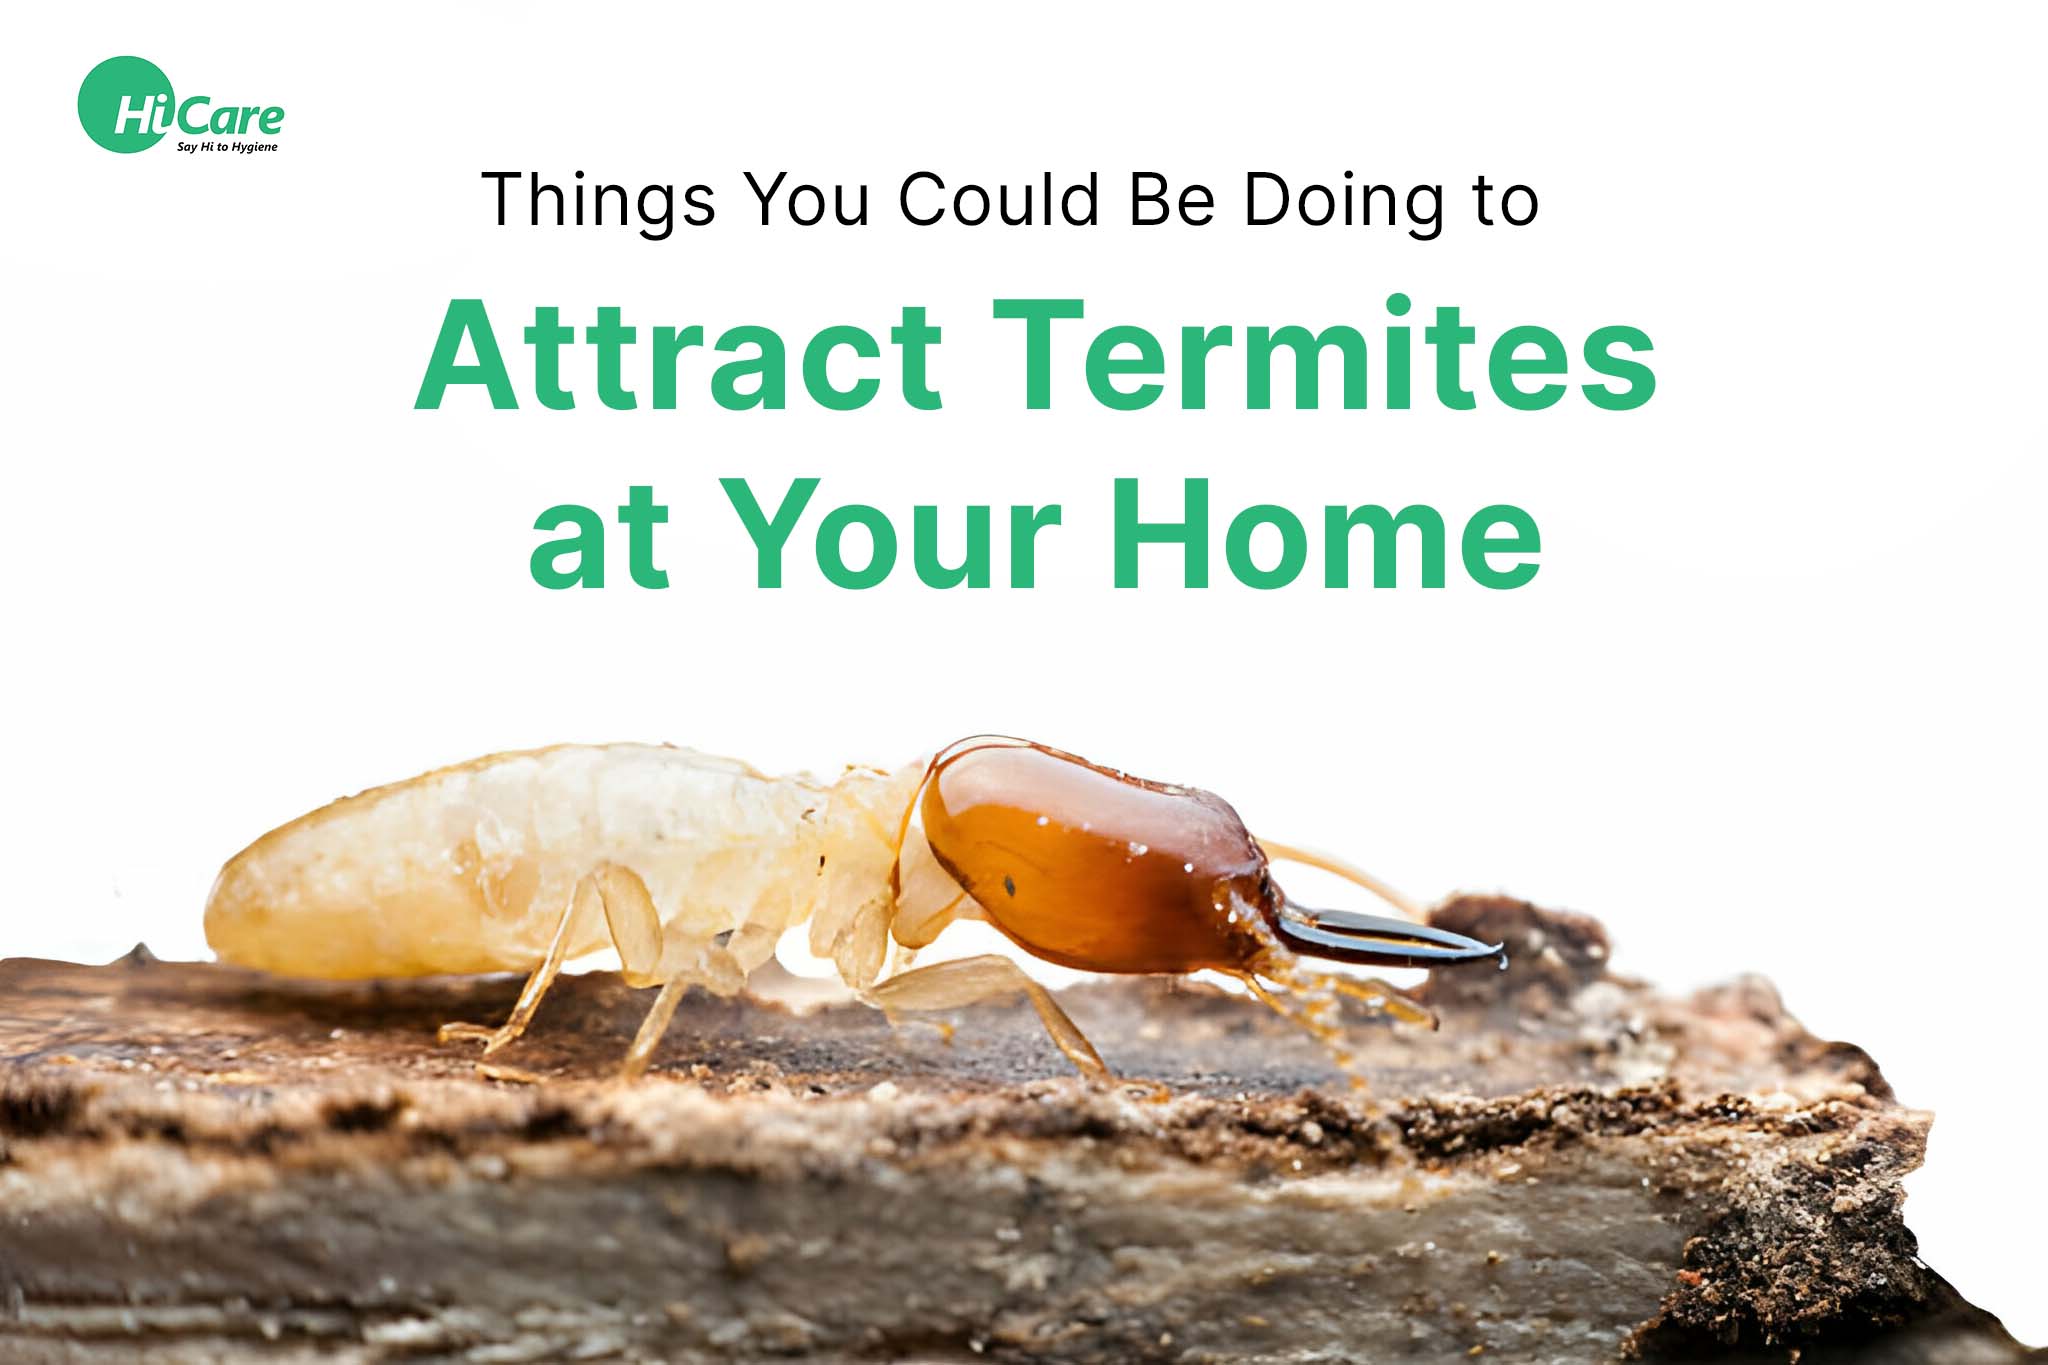 Things You Could Be Doing to Attract Termites at Your Home